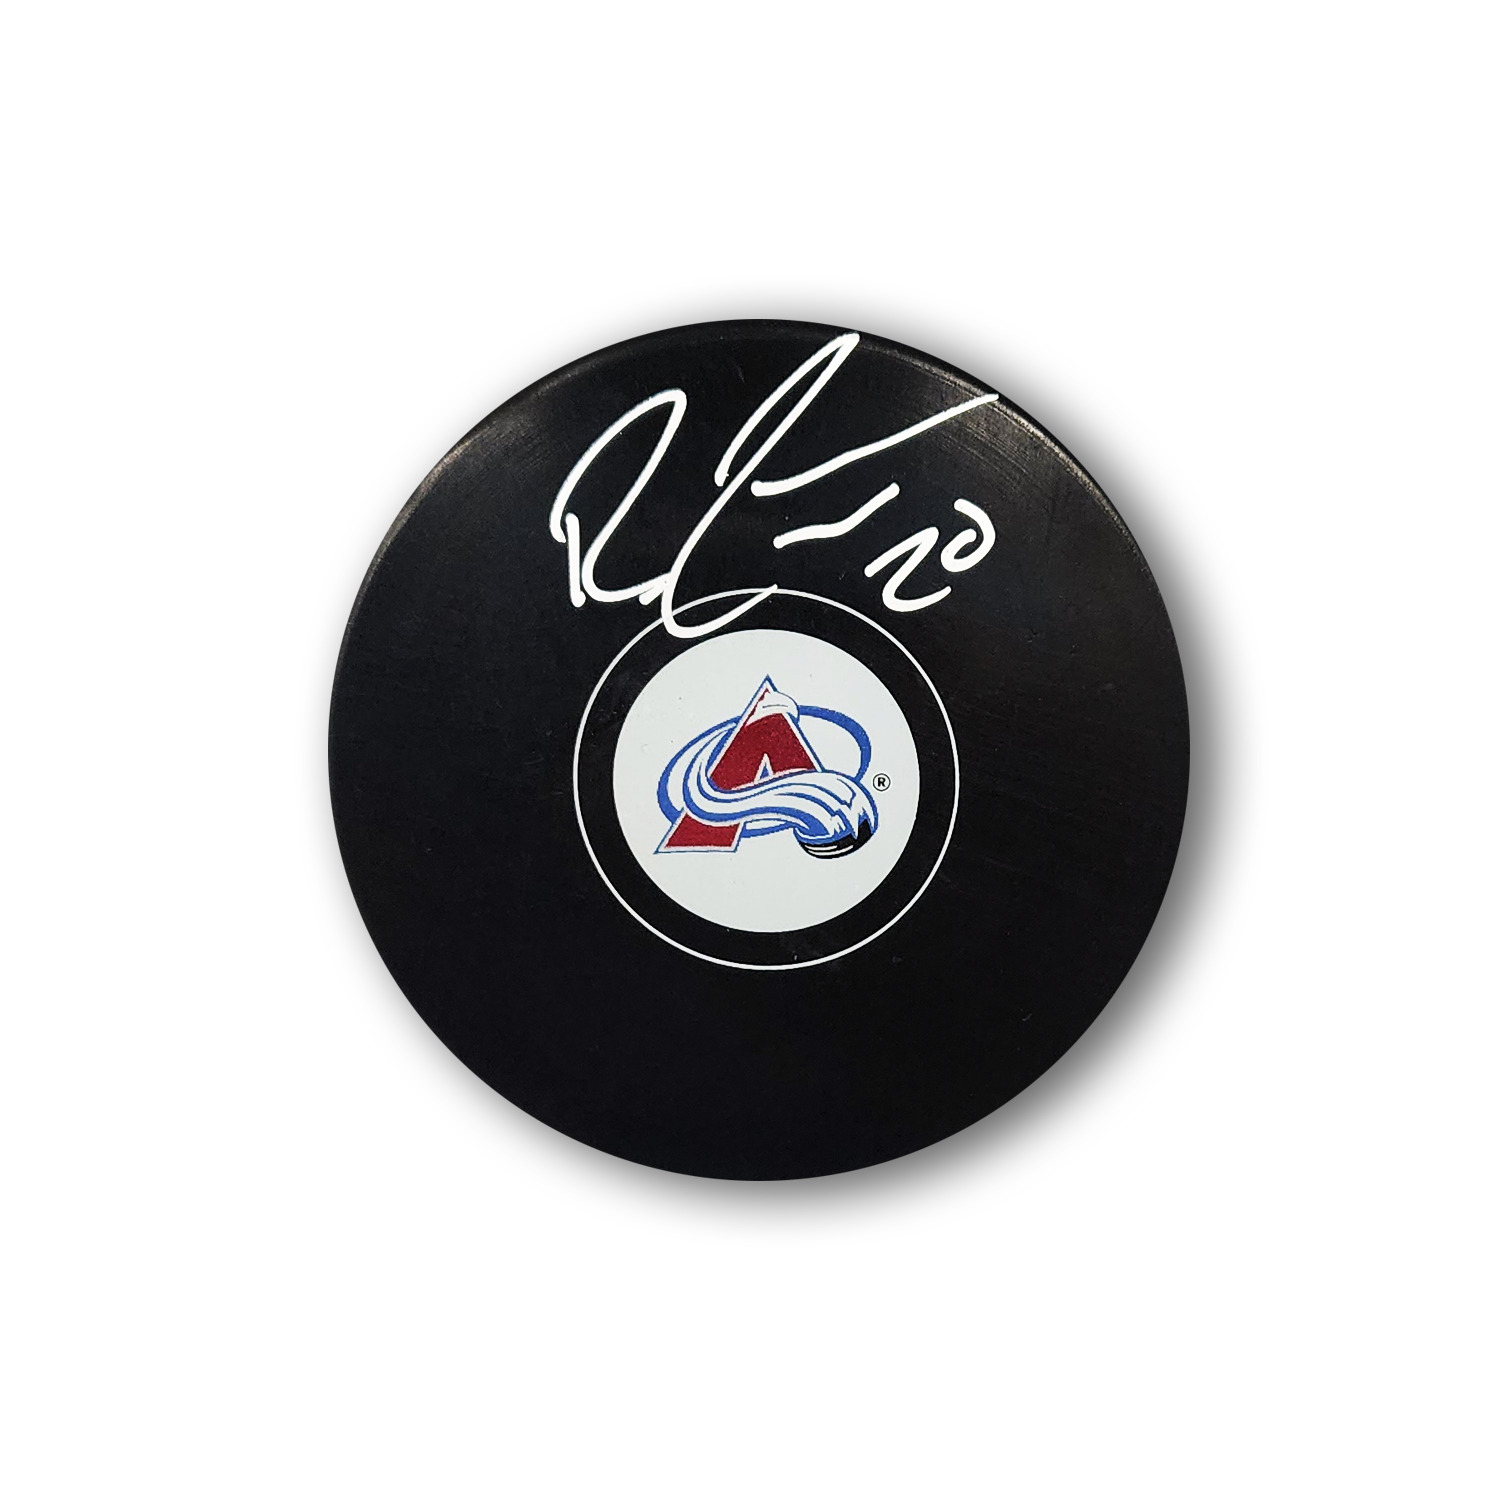 Ross Colton Autographed Colorado Avalanche Hockey Puck